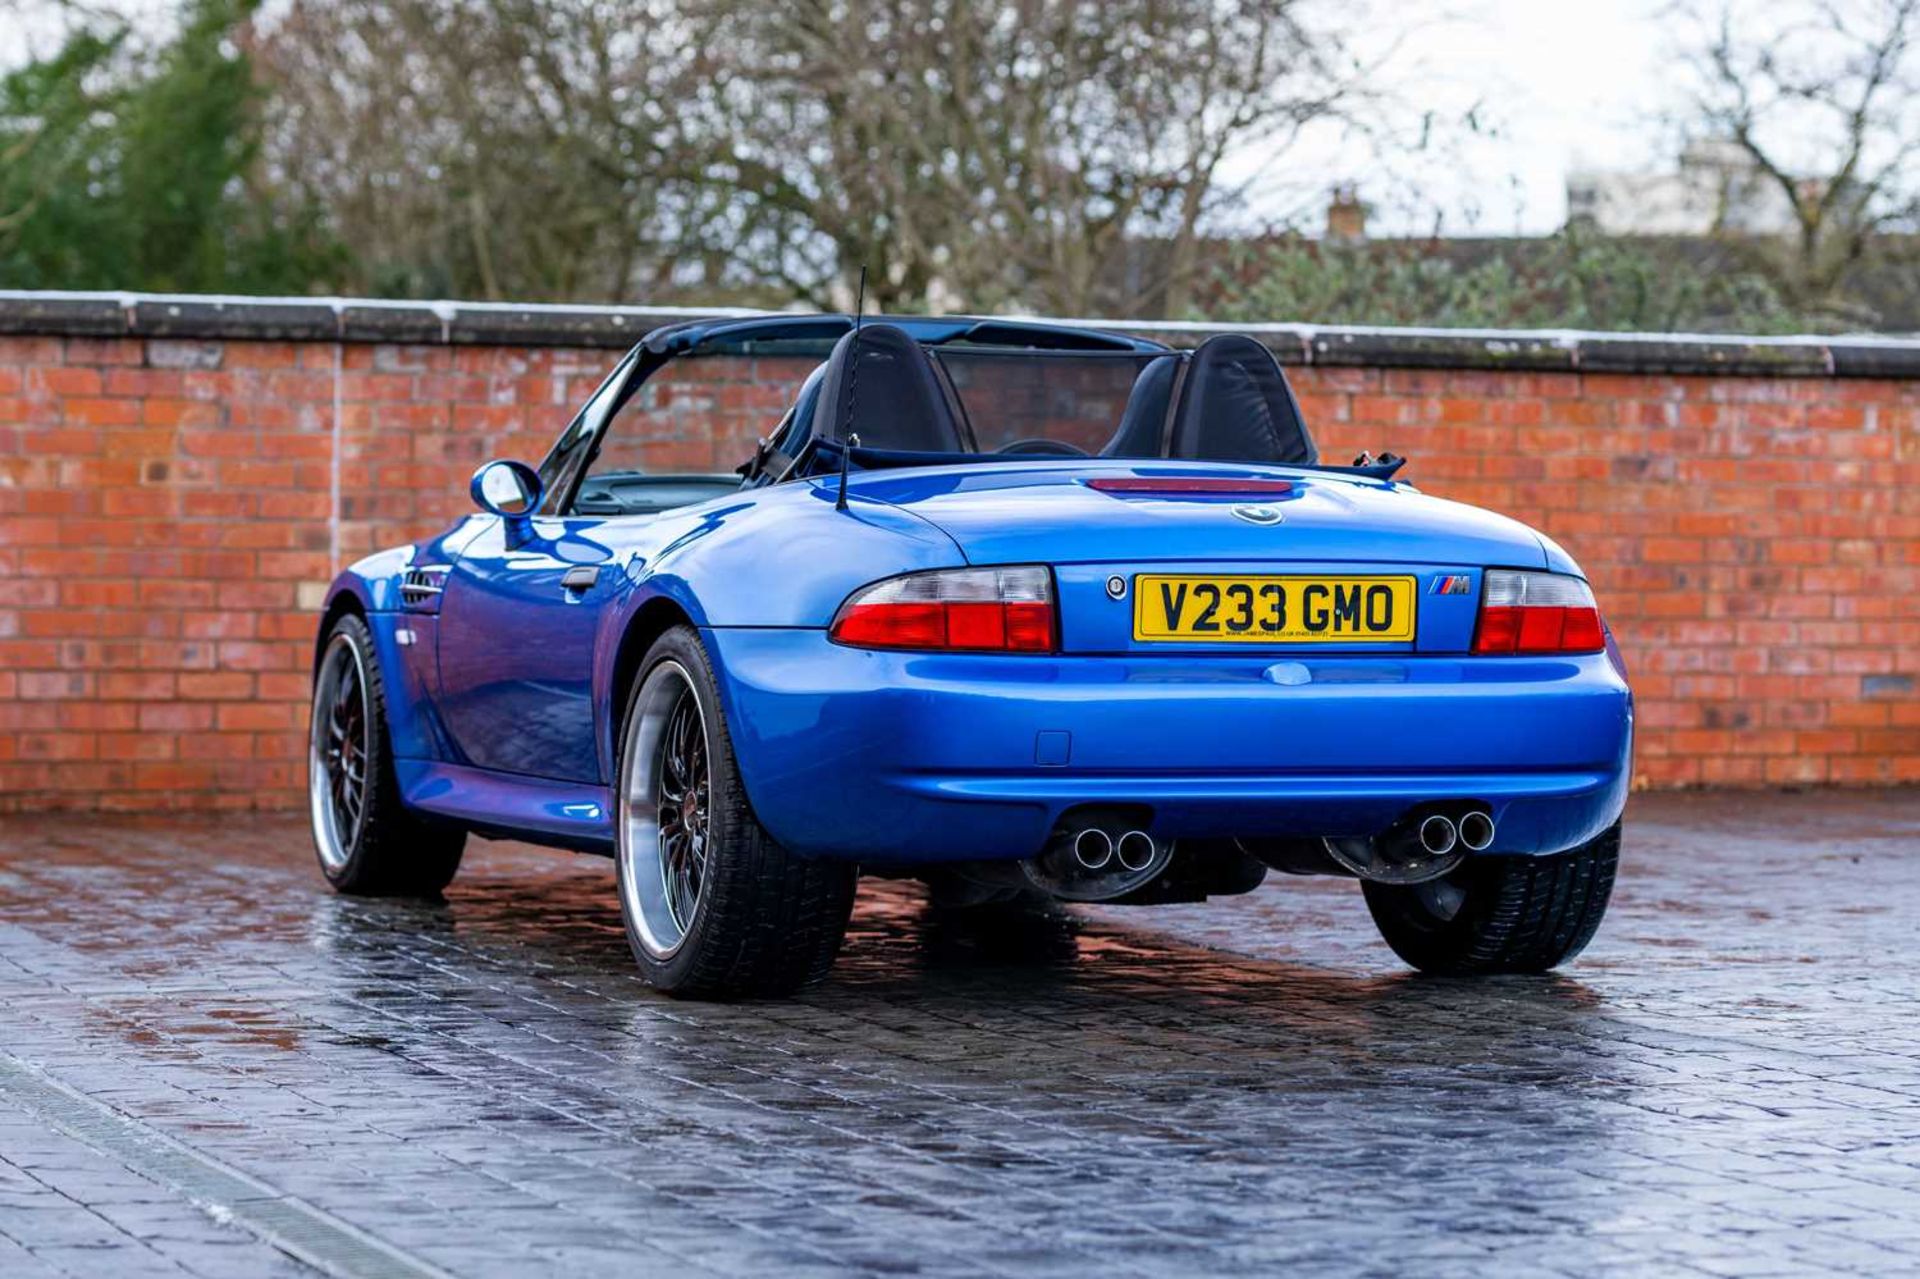 2000 BMW Z3M Convertible From long-term ownership, finished in sought-after Estoril Blue - Image 10 of 67